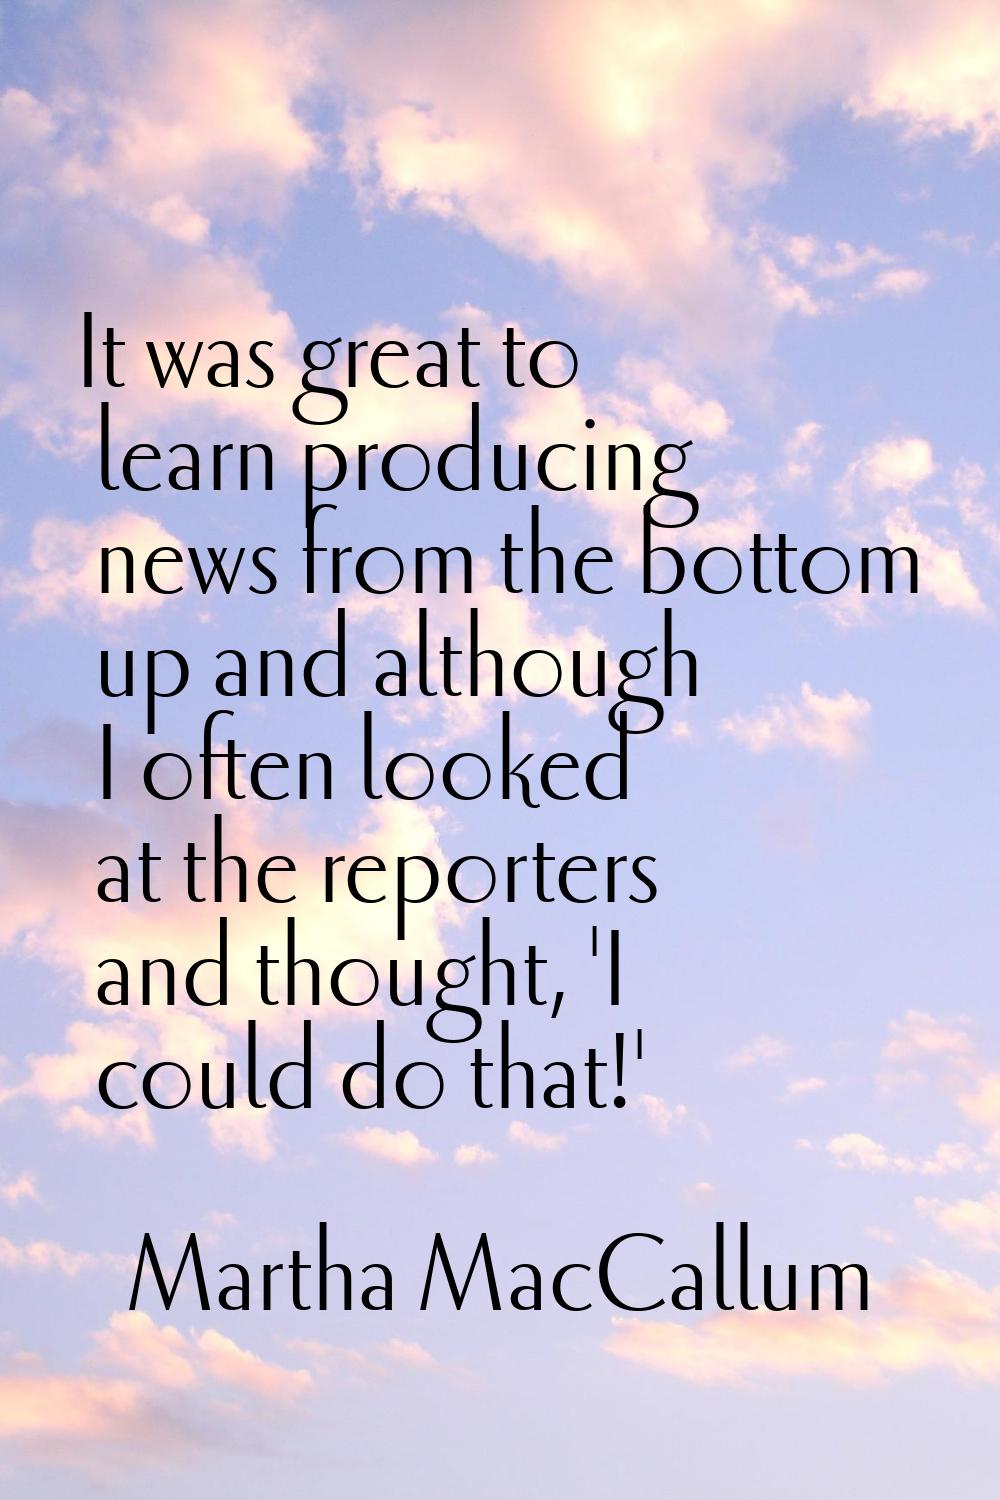 It was great to learn producing news from the bottom up and although I often looked at the reporter